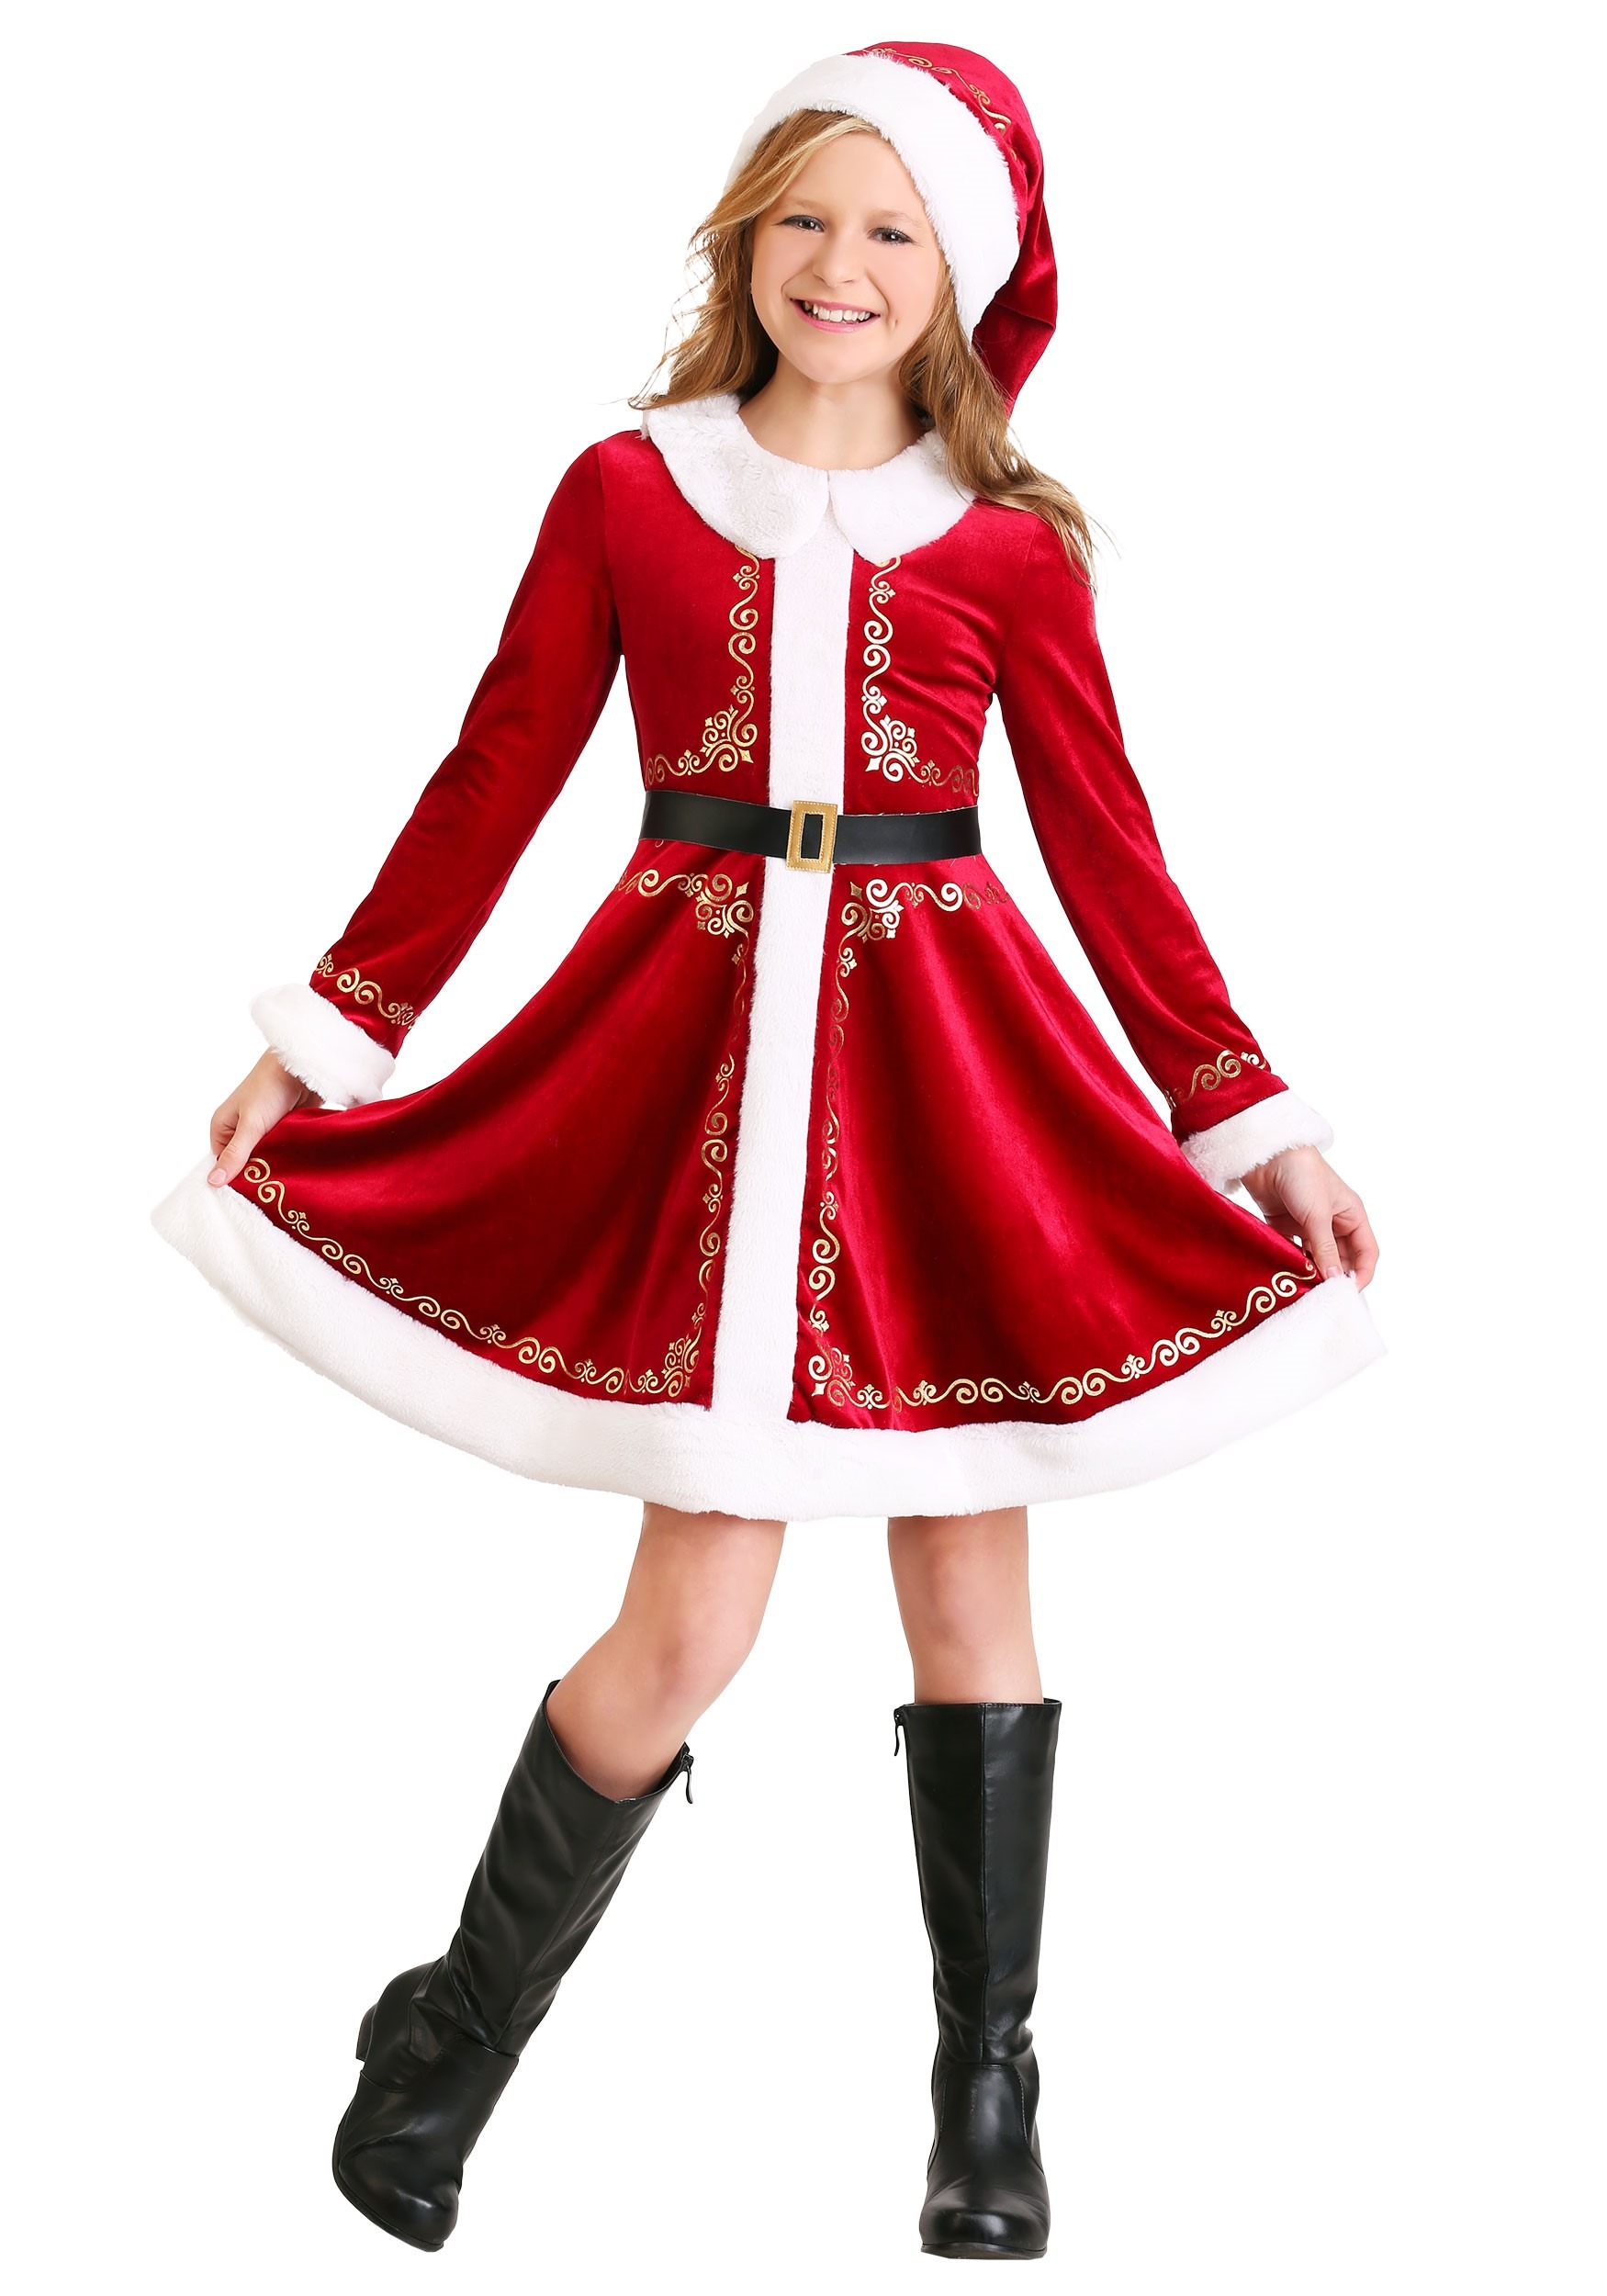 Photos - Fancy Dress SanTa FUN Costumes Girl's Red  Costume Dress Red/White 